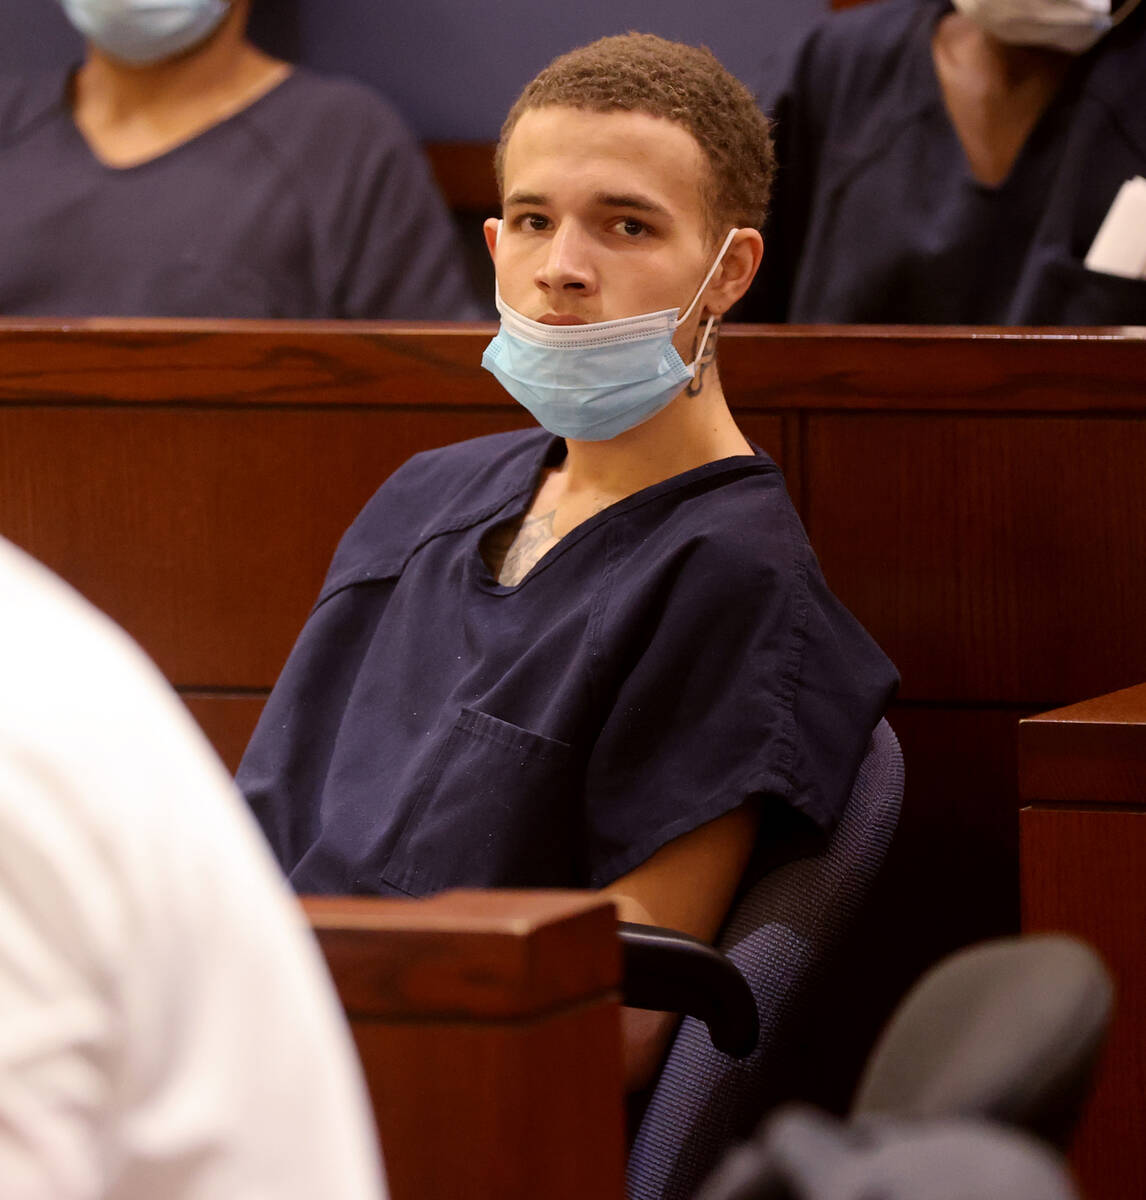 Jordan Ruby, 18, appears in court at the Regional Justice Center in downtown Las Vegas Tuesday, ...